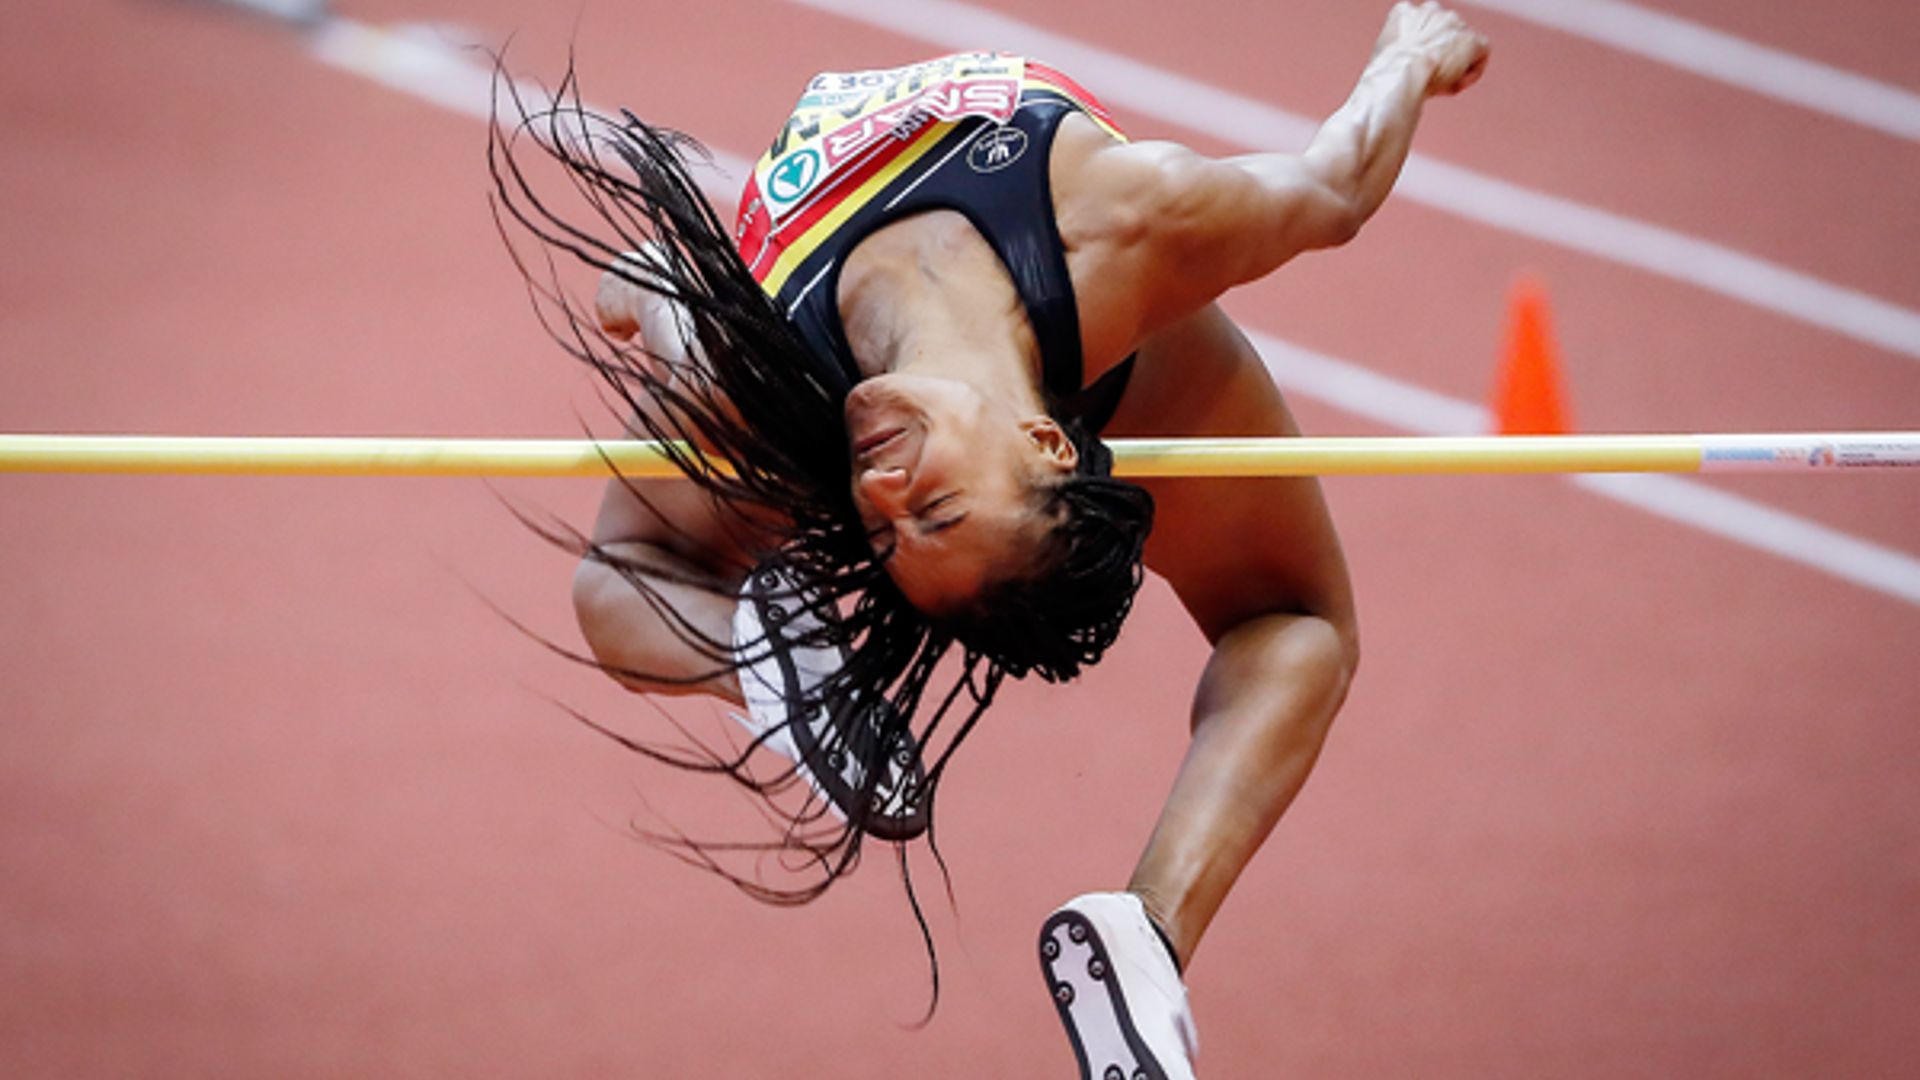 Nafissatou Thiam in action during a high jump event (Image Credits - World Athletics)